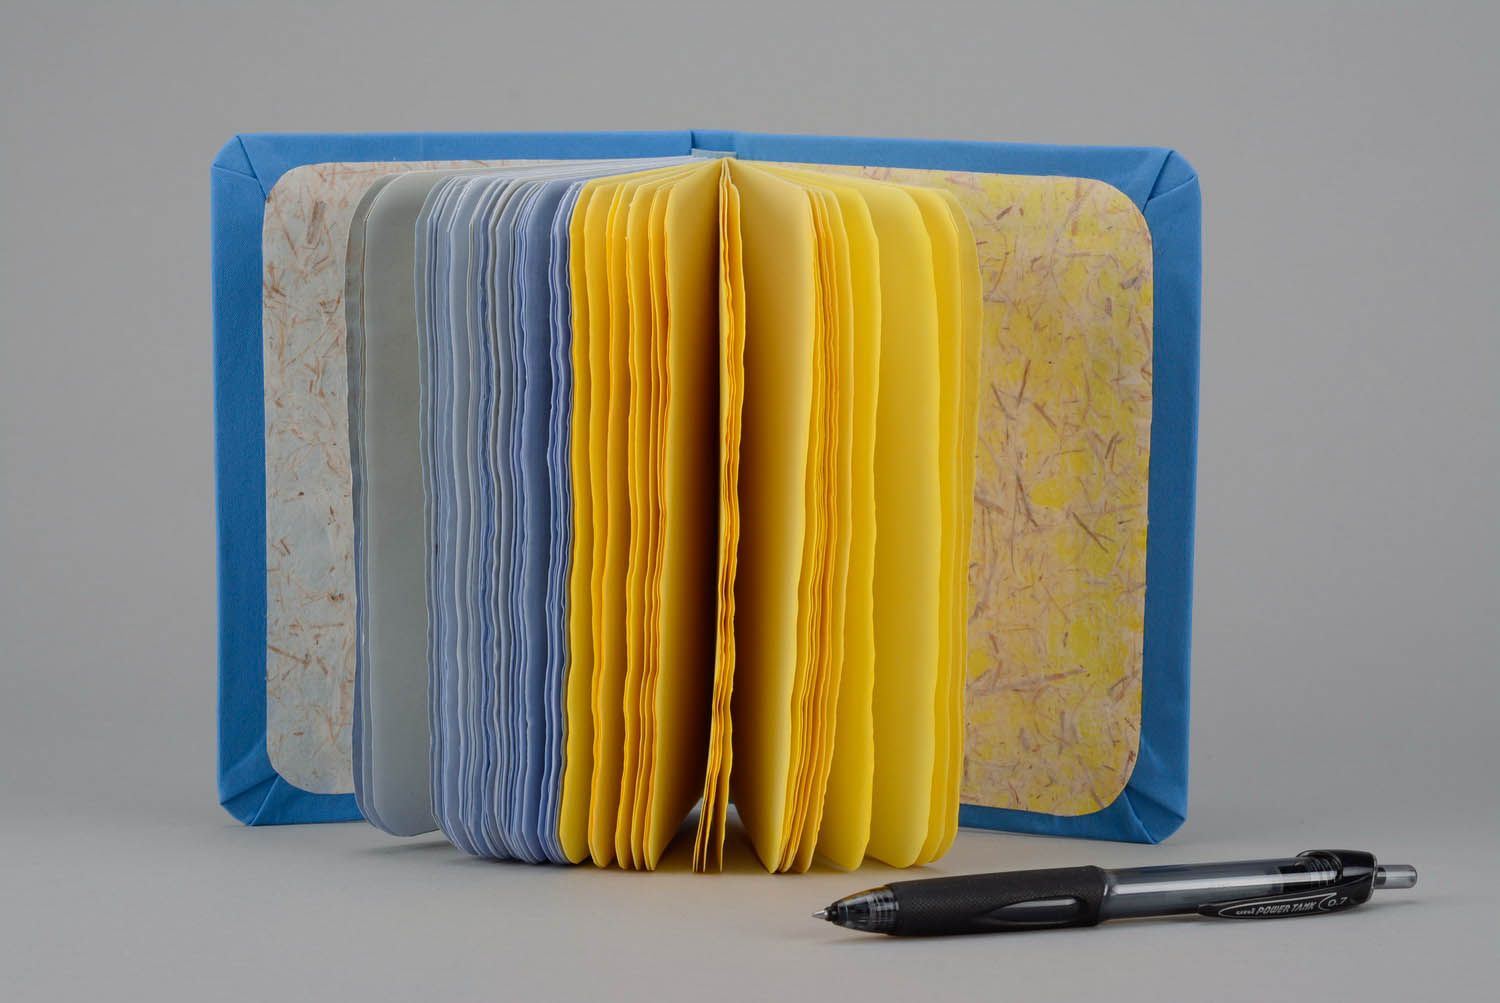 Flavored notebook, blue and yellow photo 4